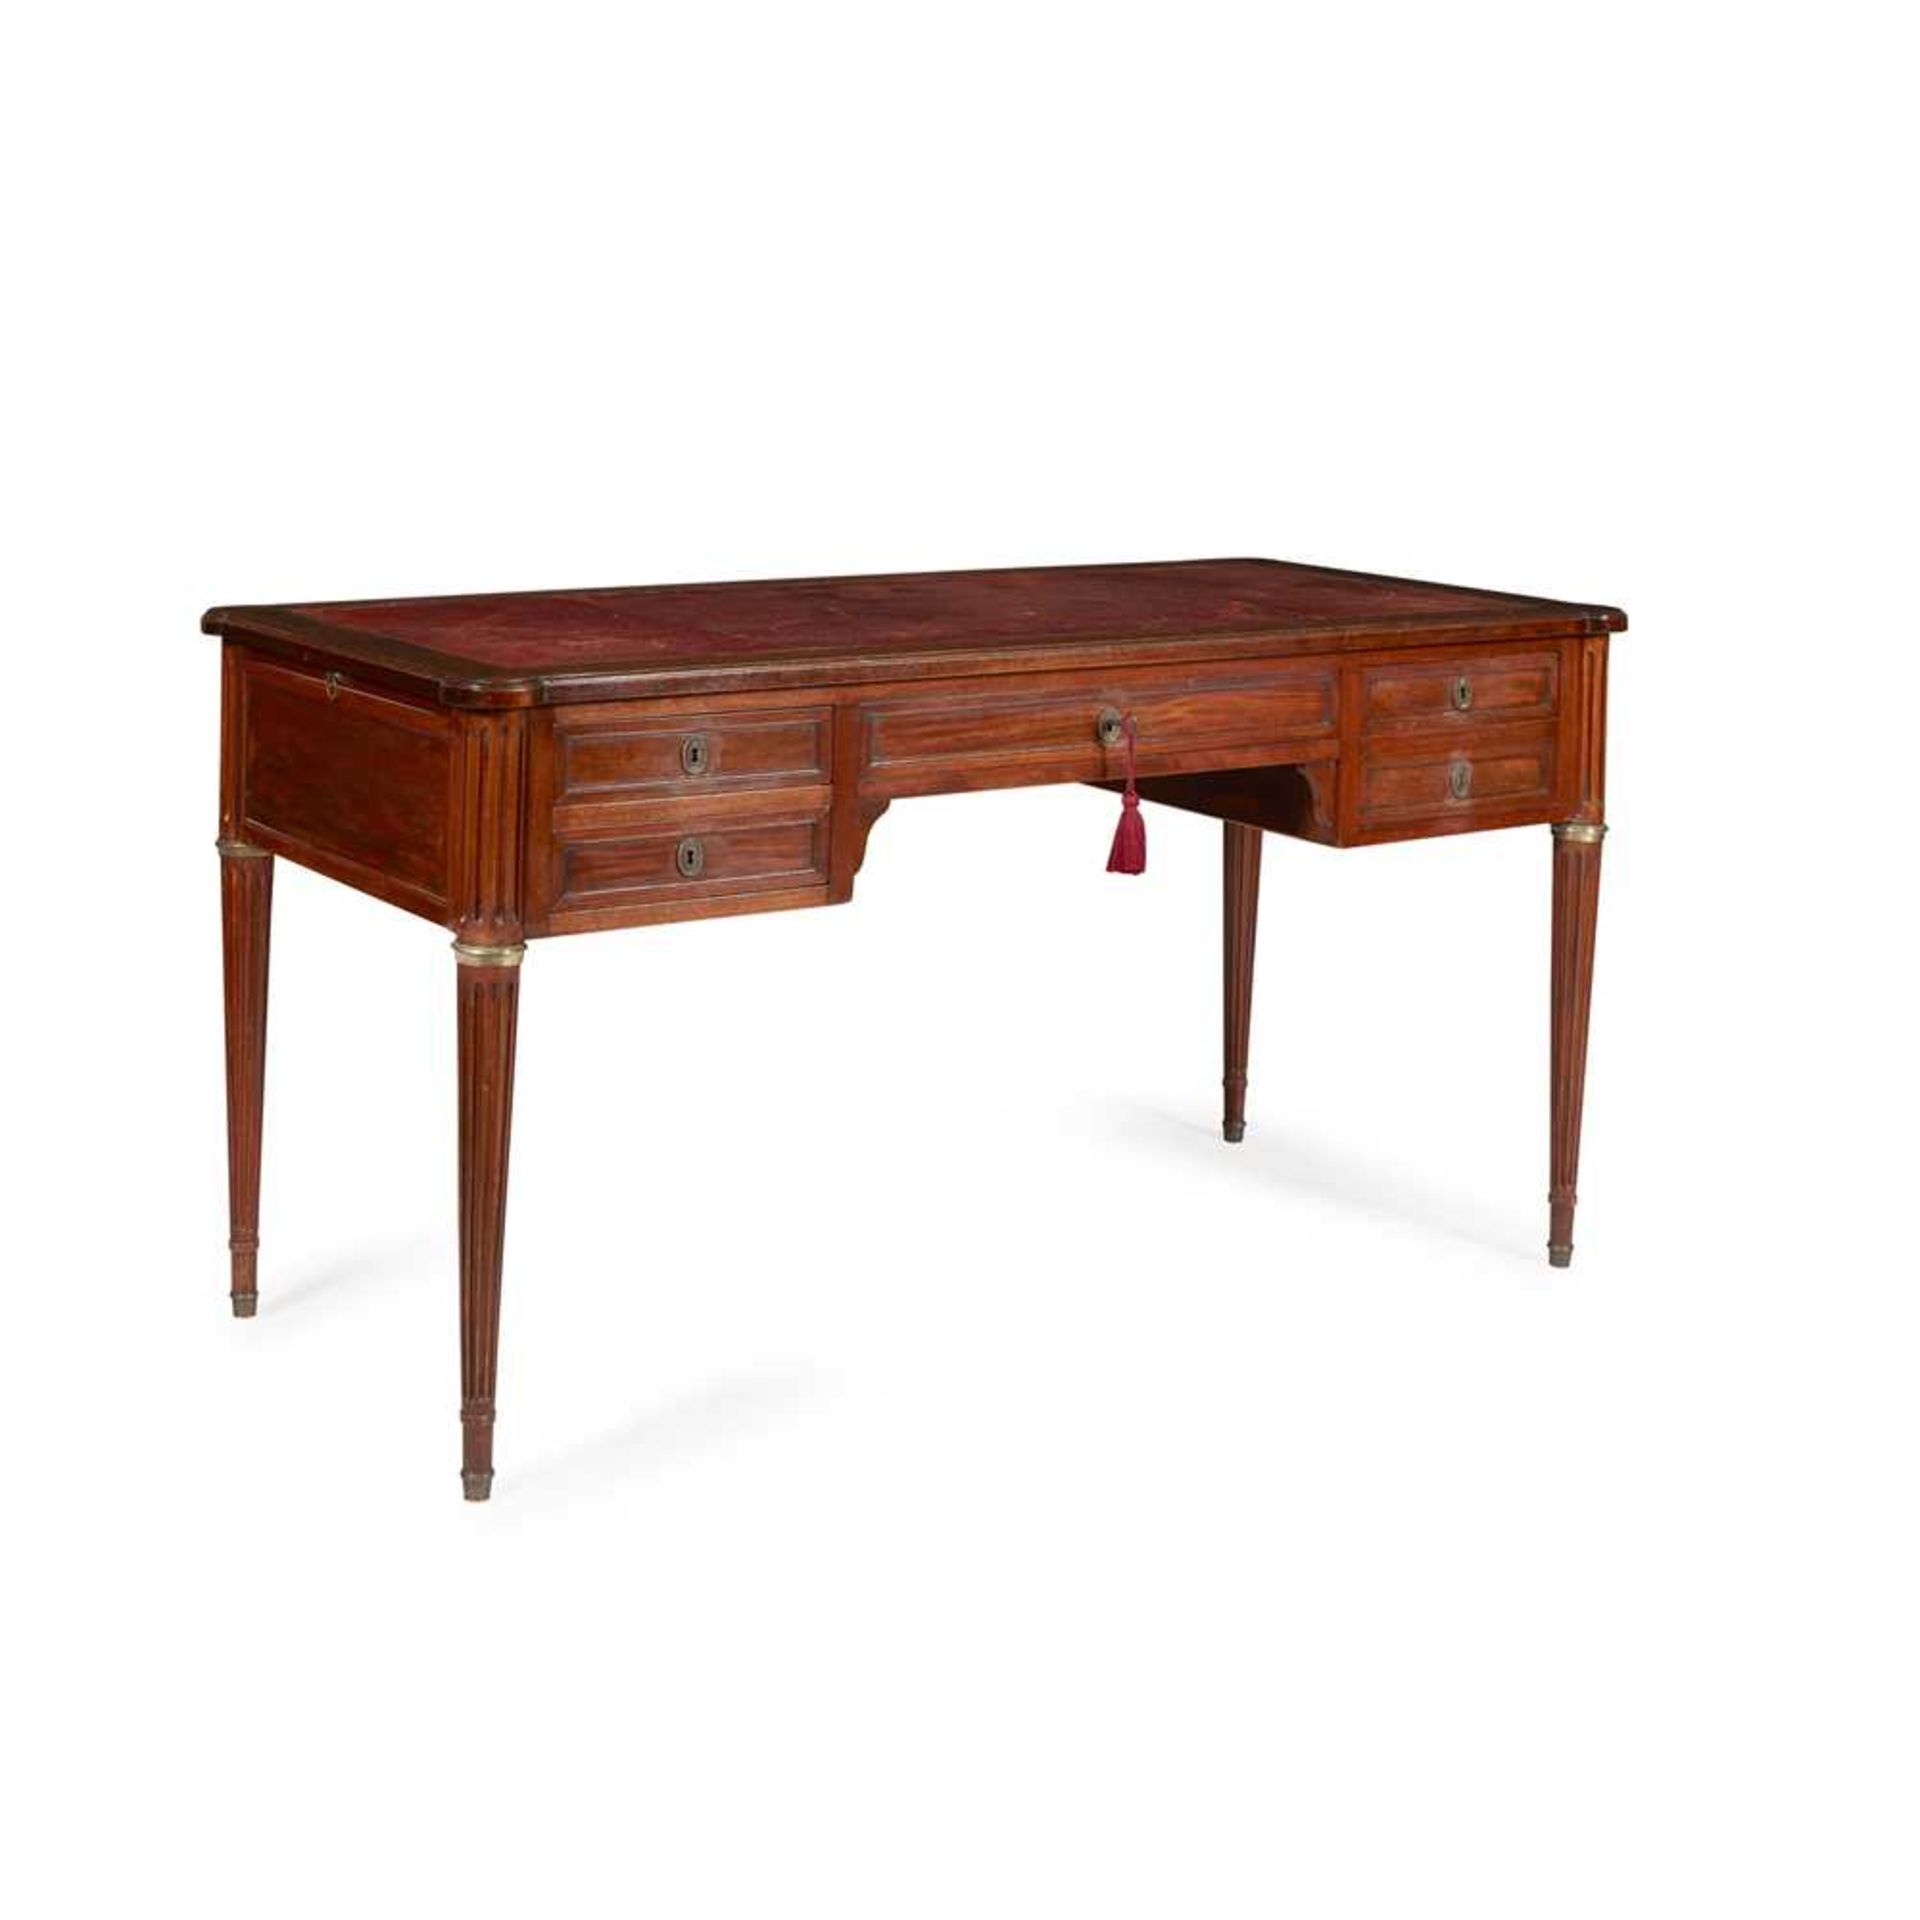 FRENCH MAHOGANY BRASS MOUNTED BUREAU LATE 19TH/ EARLY 20TH CENTURY